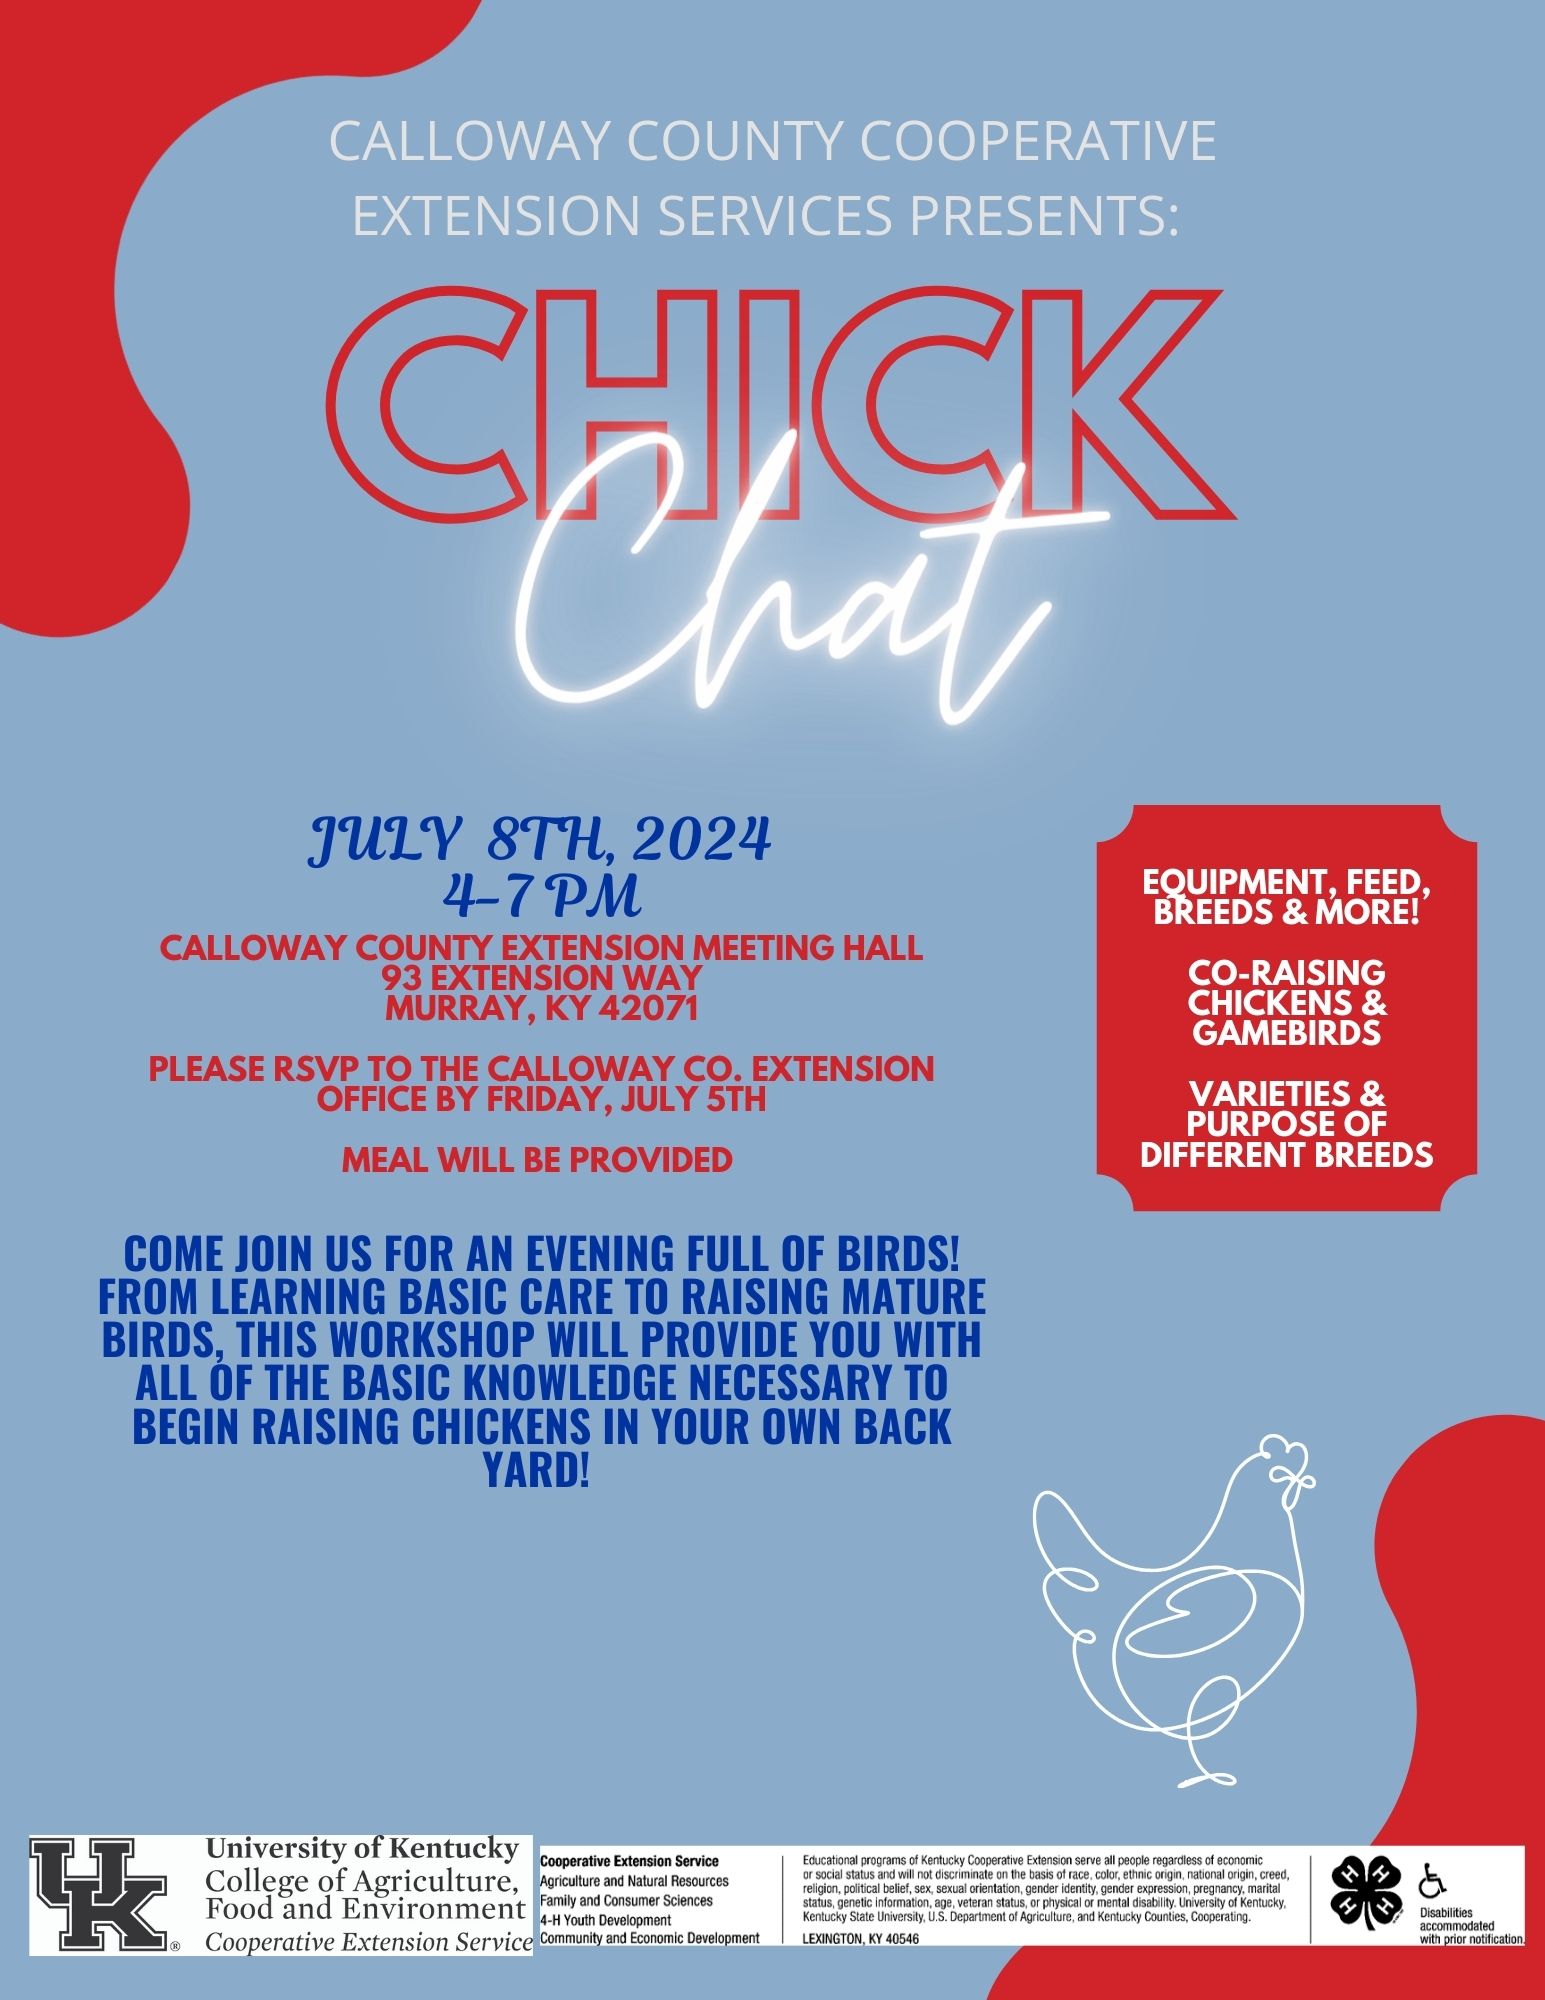 Chick Chat Informational Flyer